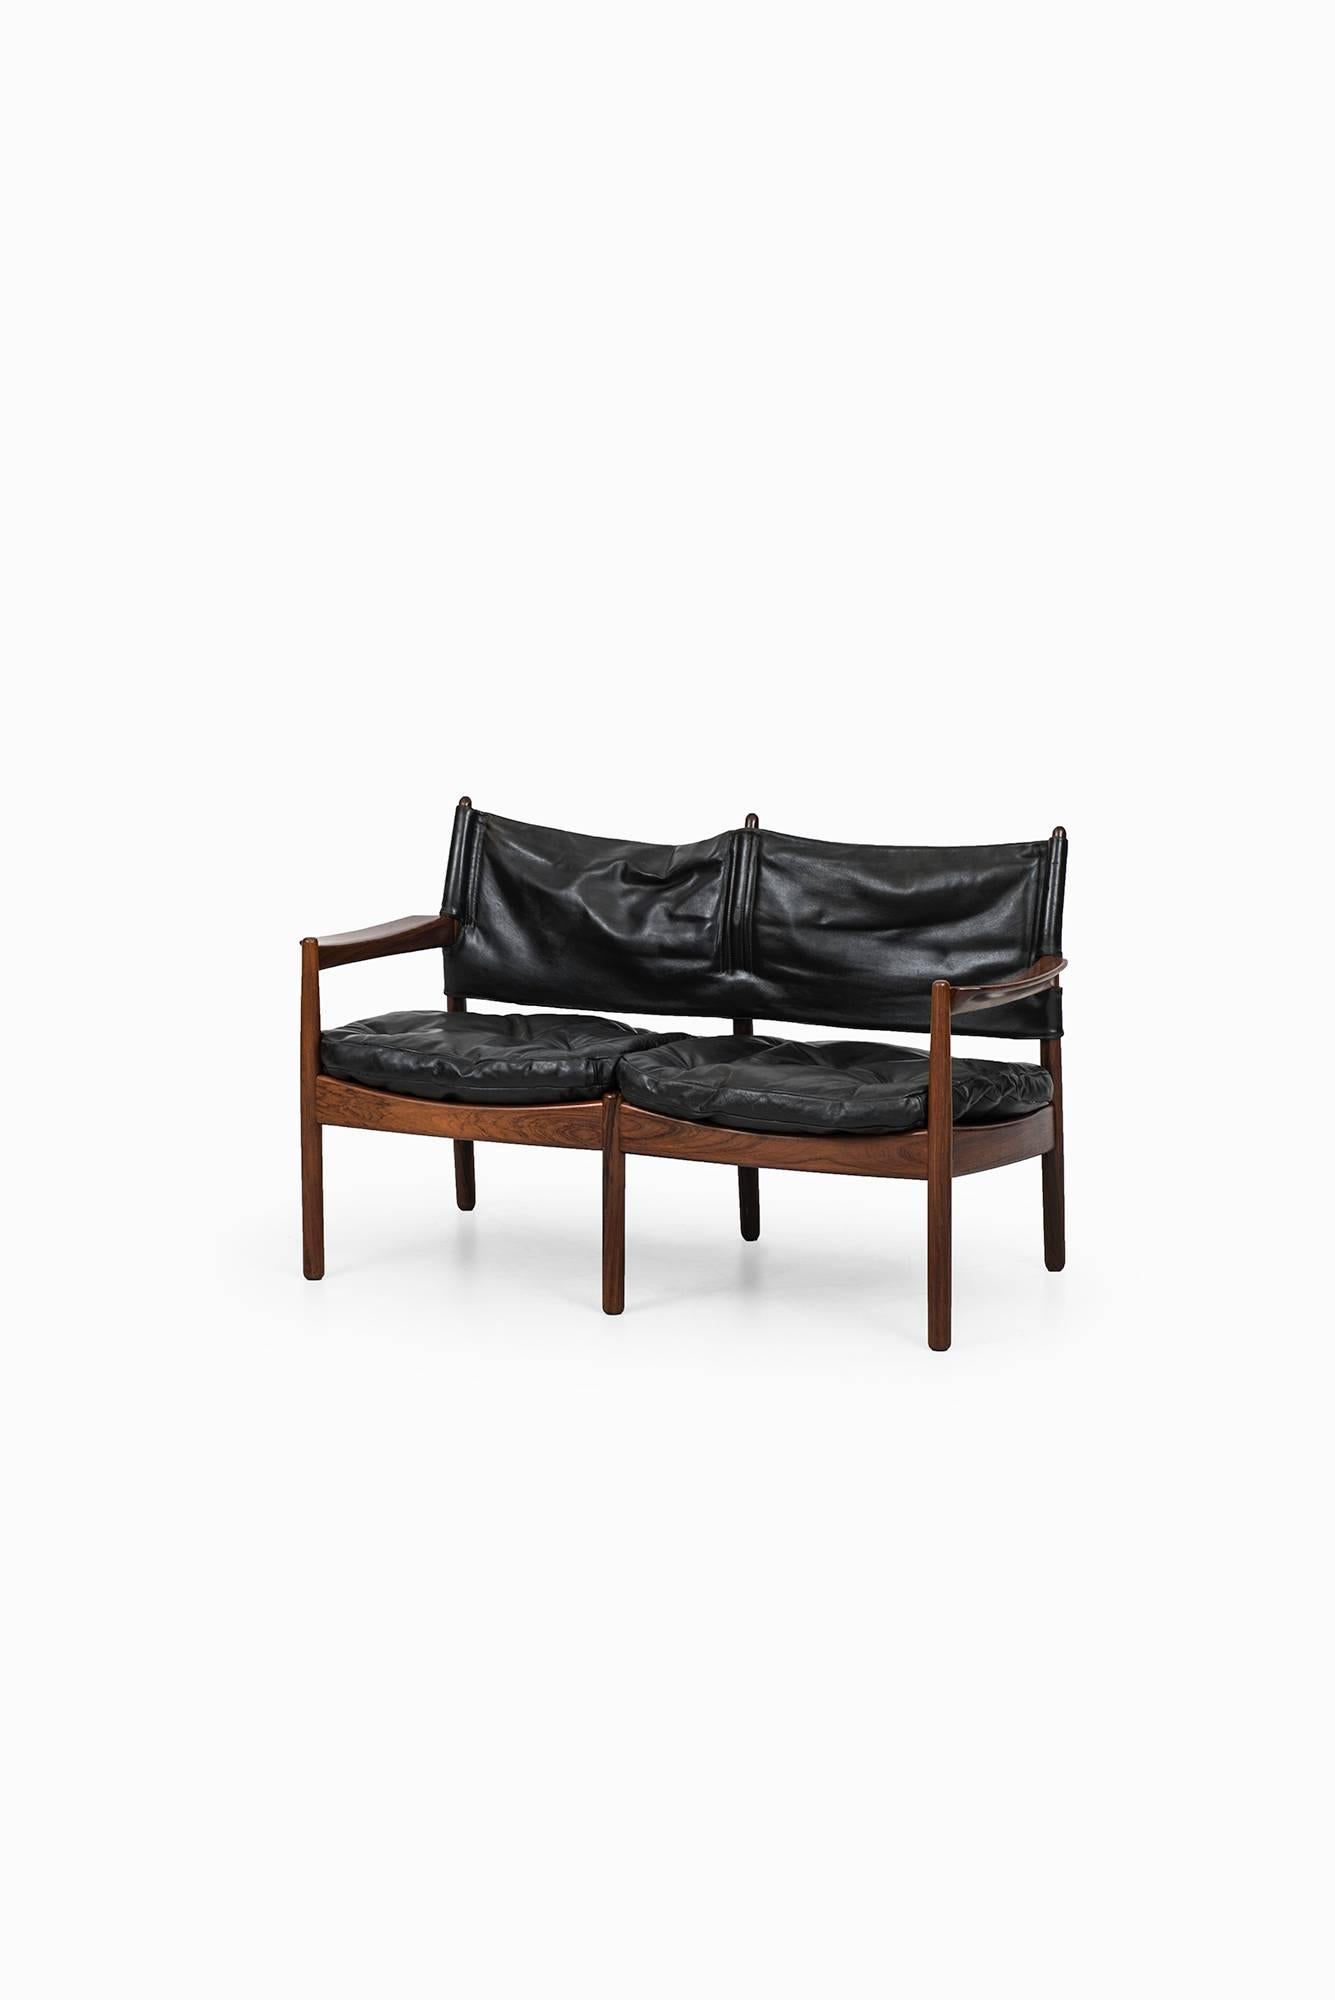 Mid-20th Century Gunnar Myrstrand Two-Seat Sofa by Källemo in Sweden